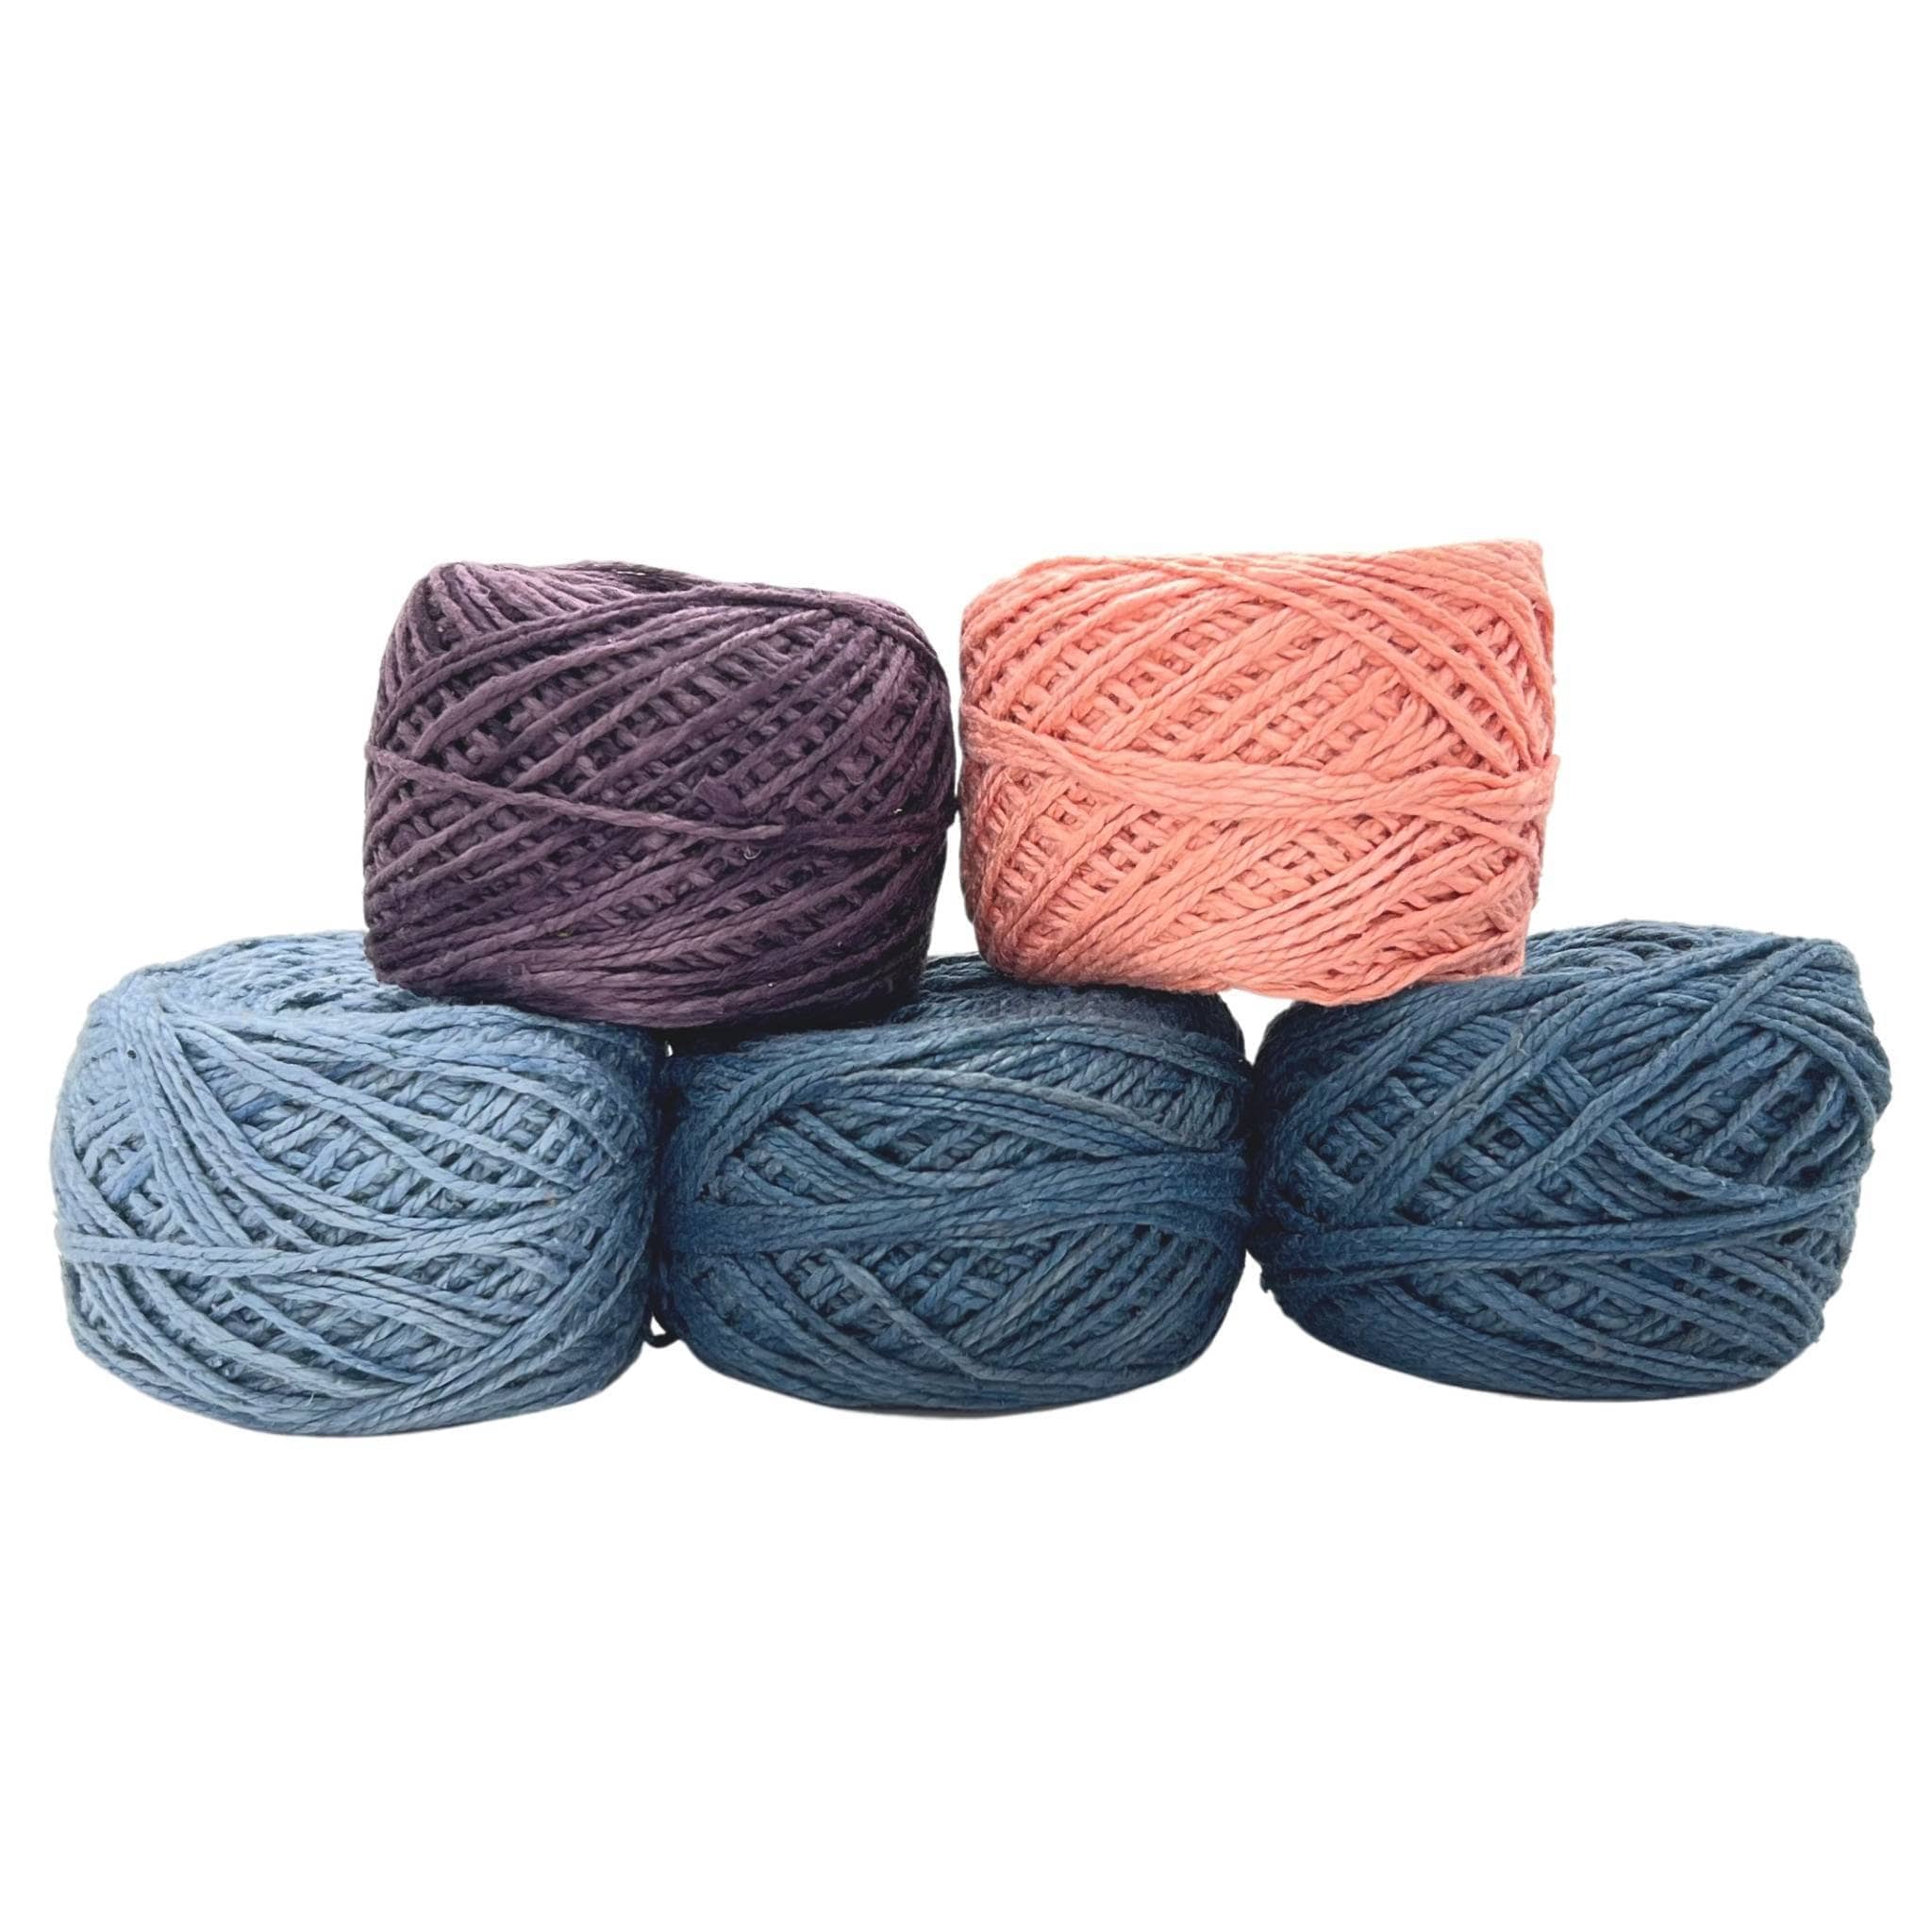 Ombre Sport Weight Silk Mega Pack - Ethically Sourced Yarn, Craft Kits, Home Goods, Clothing & Accessories